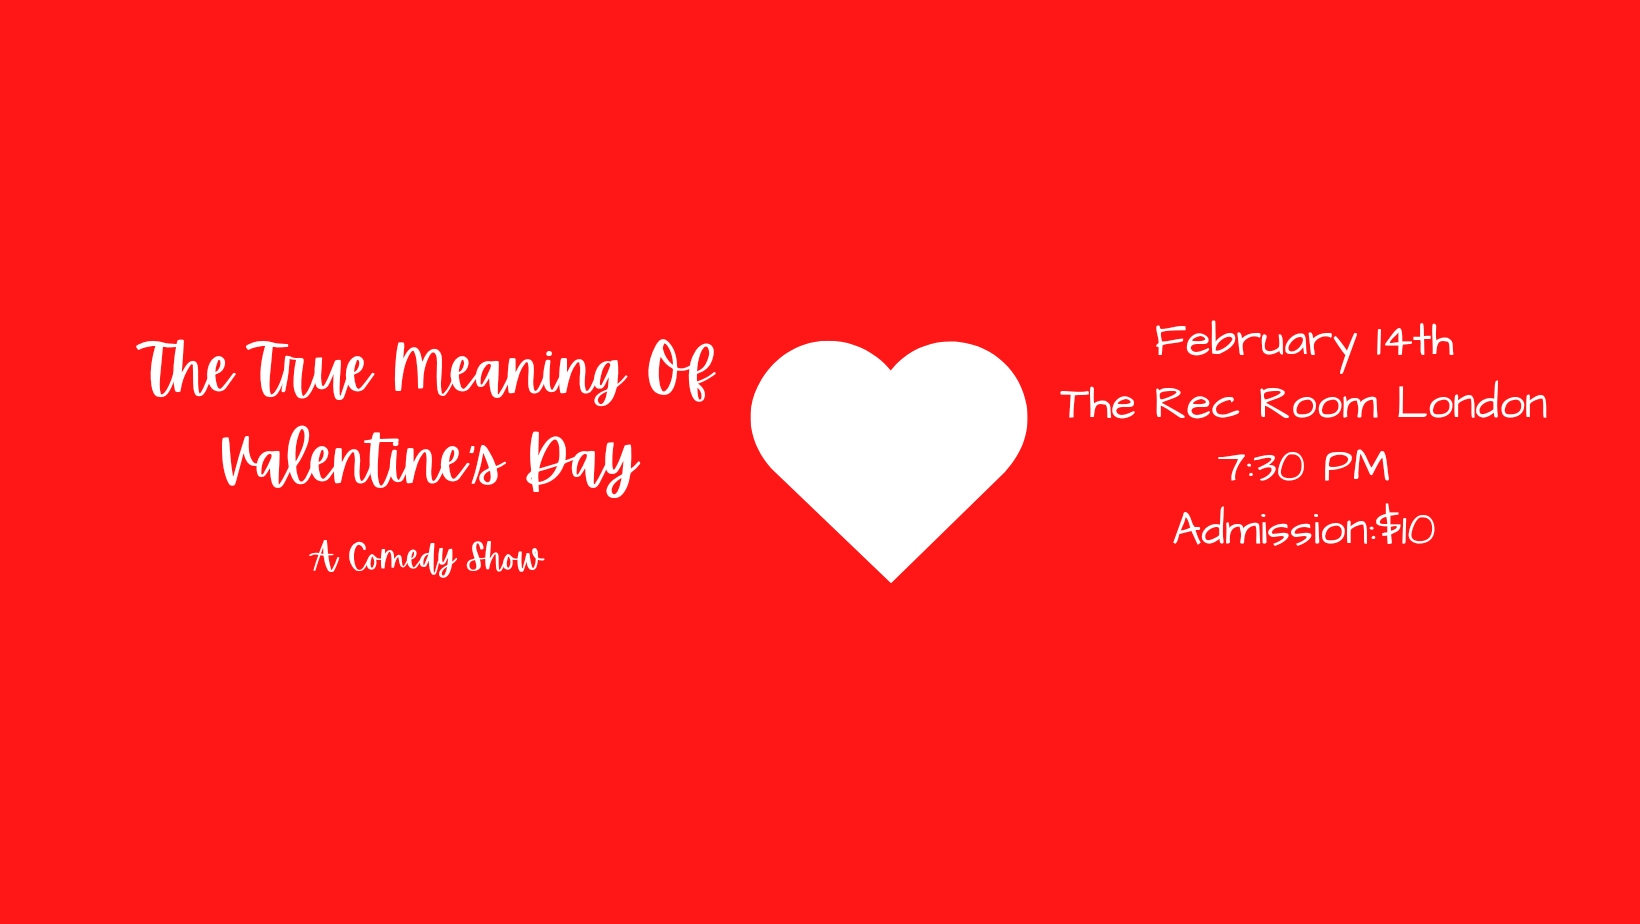 The True Meaning Of Valentine's Day: A Comedy Show